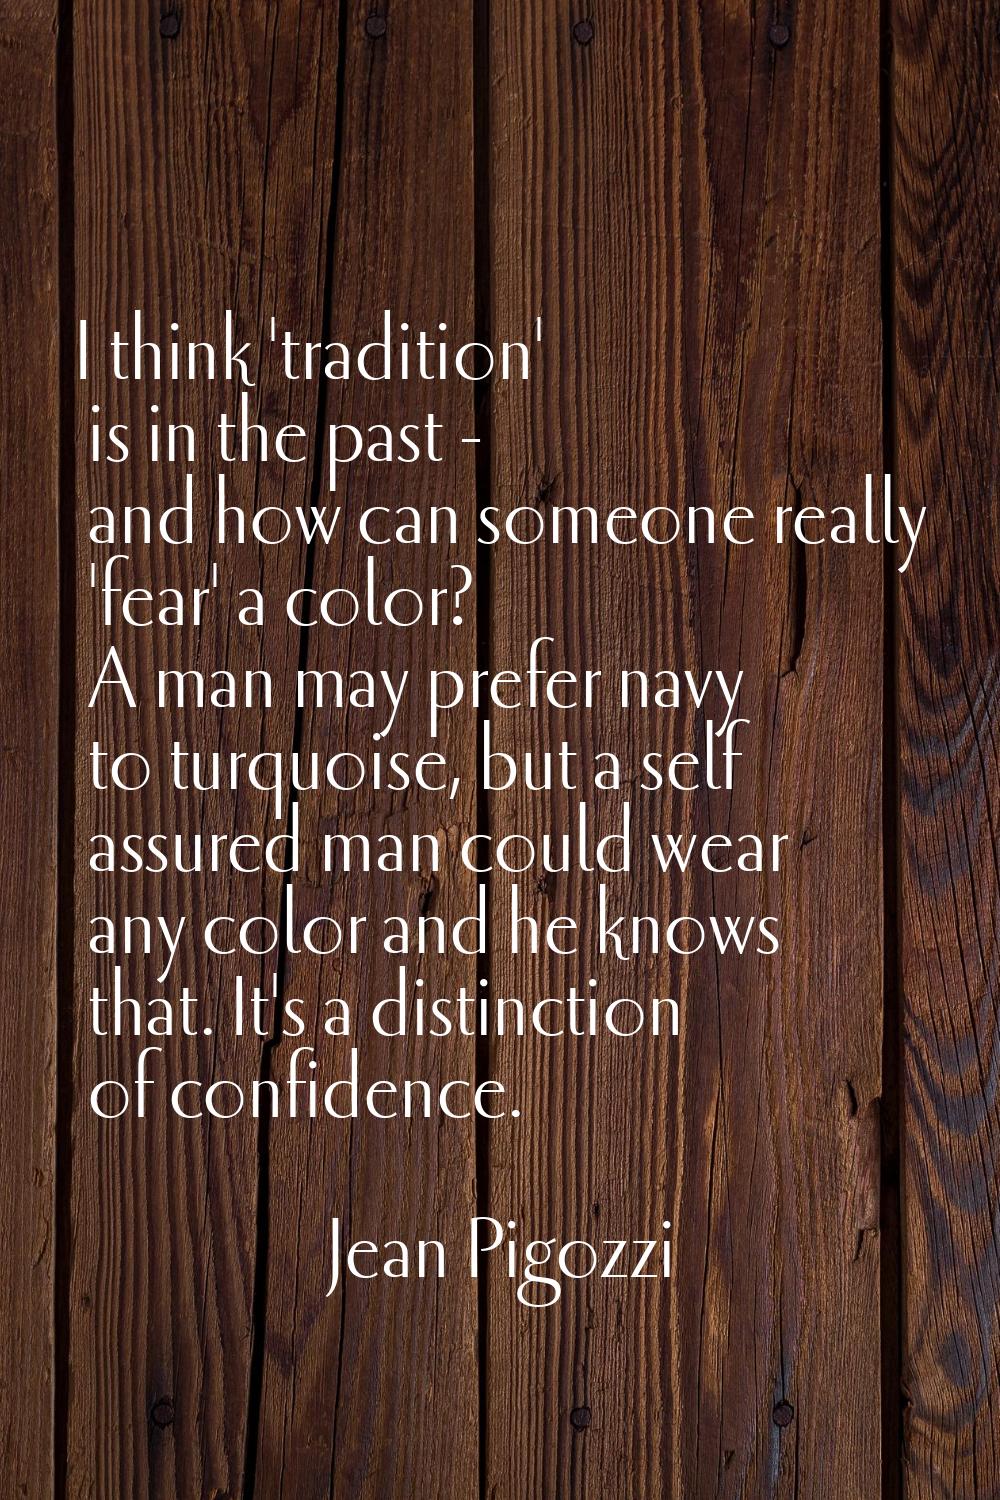 I think 'tradition' is in the past - and how can someone really 'fear' a color? A man may prefer na